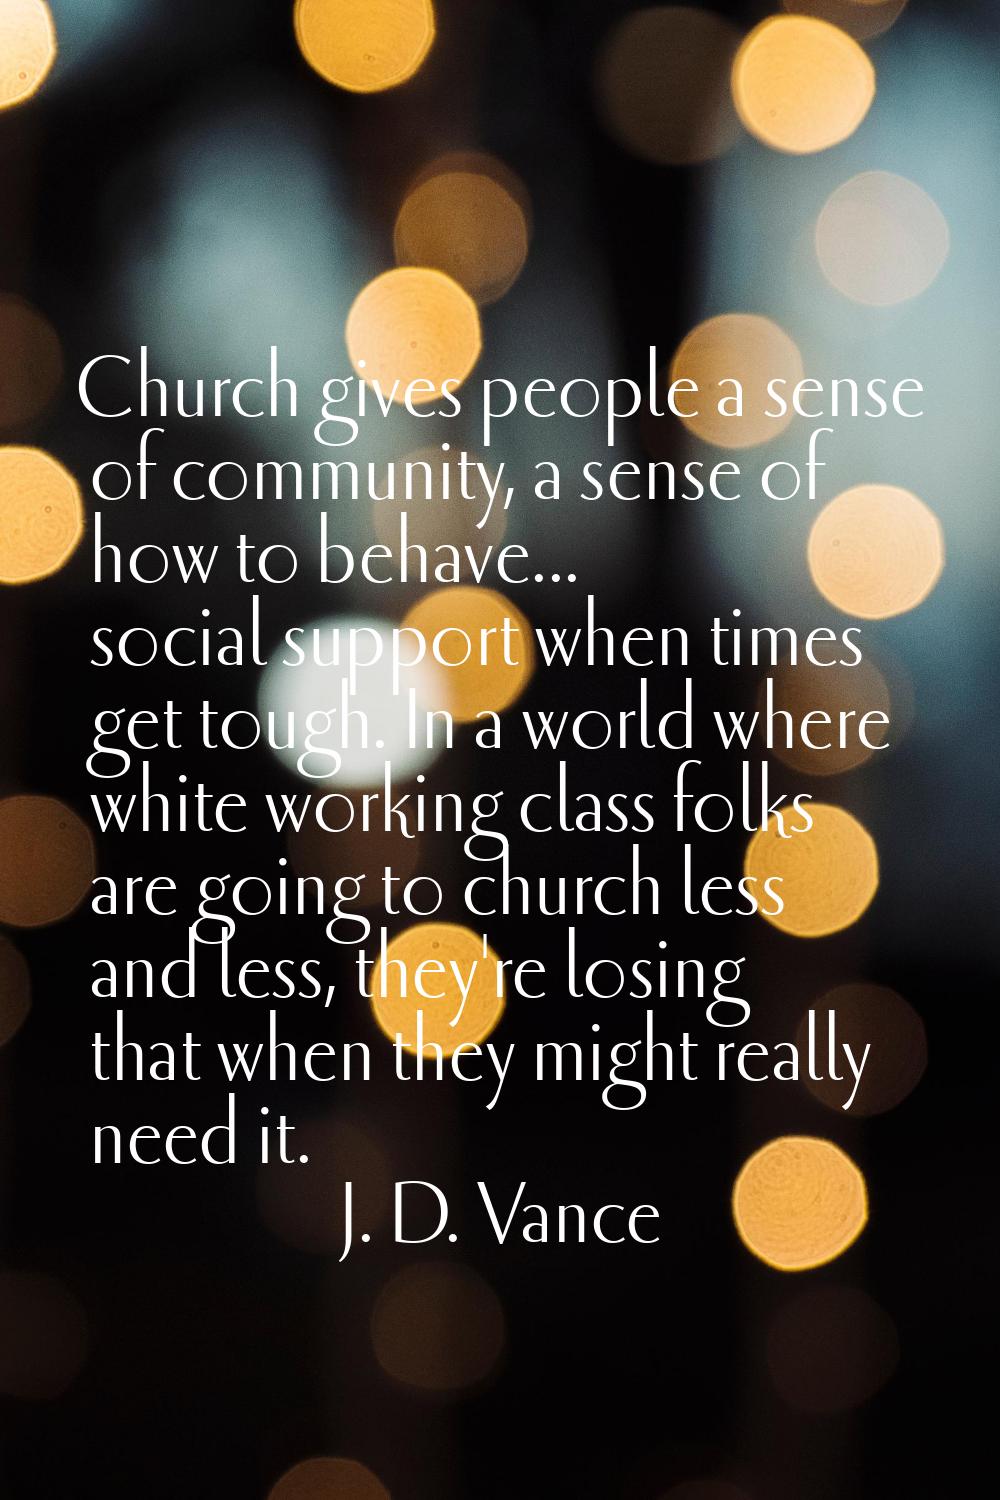 Church gives people a sense of community, a sense of how to behave... social support when times get